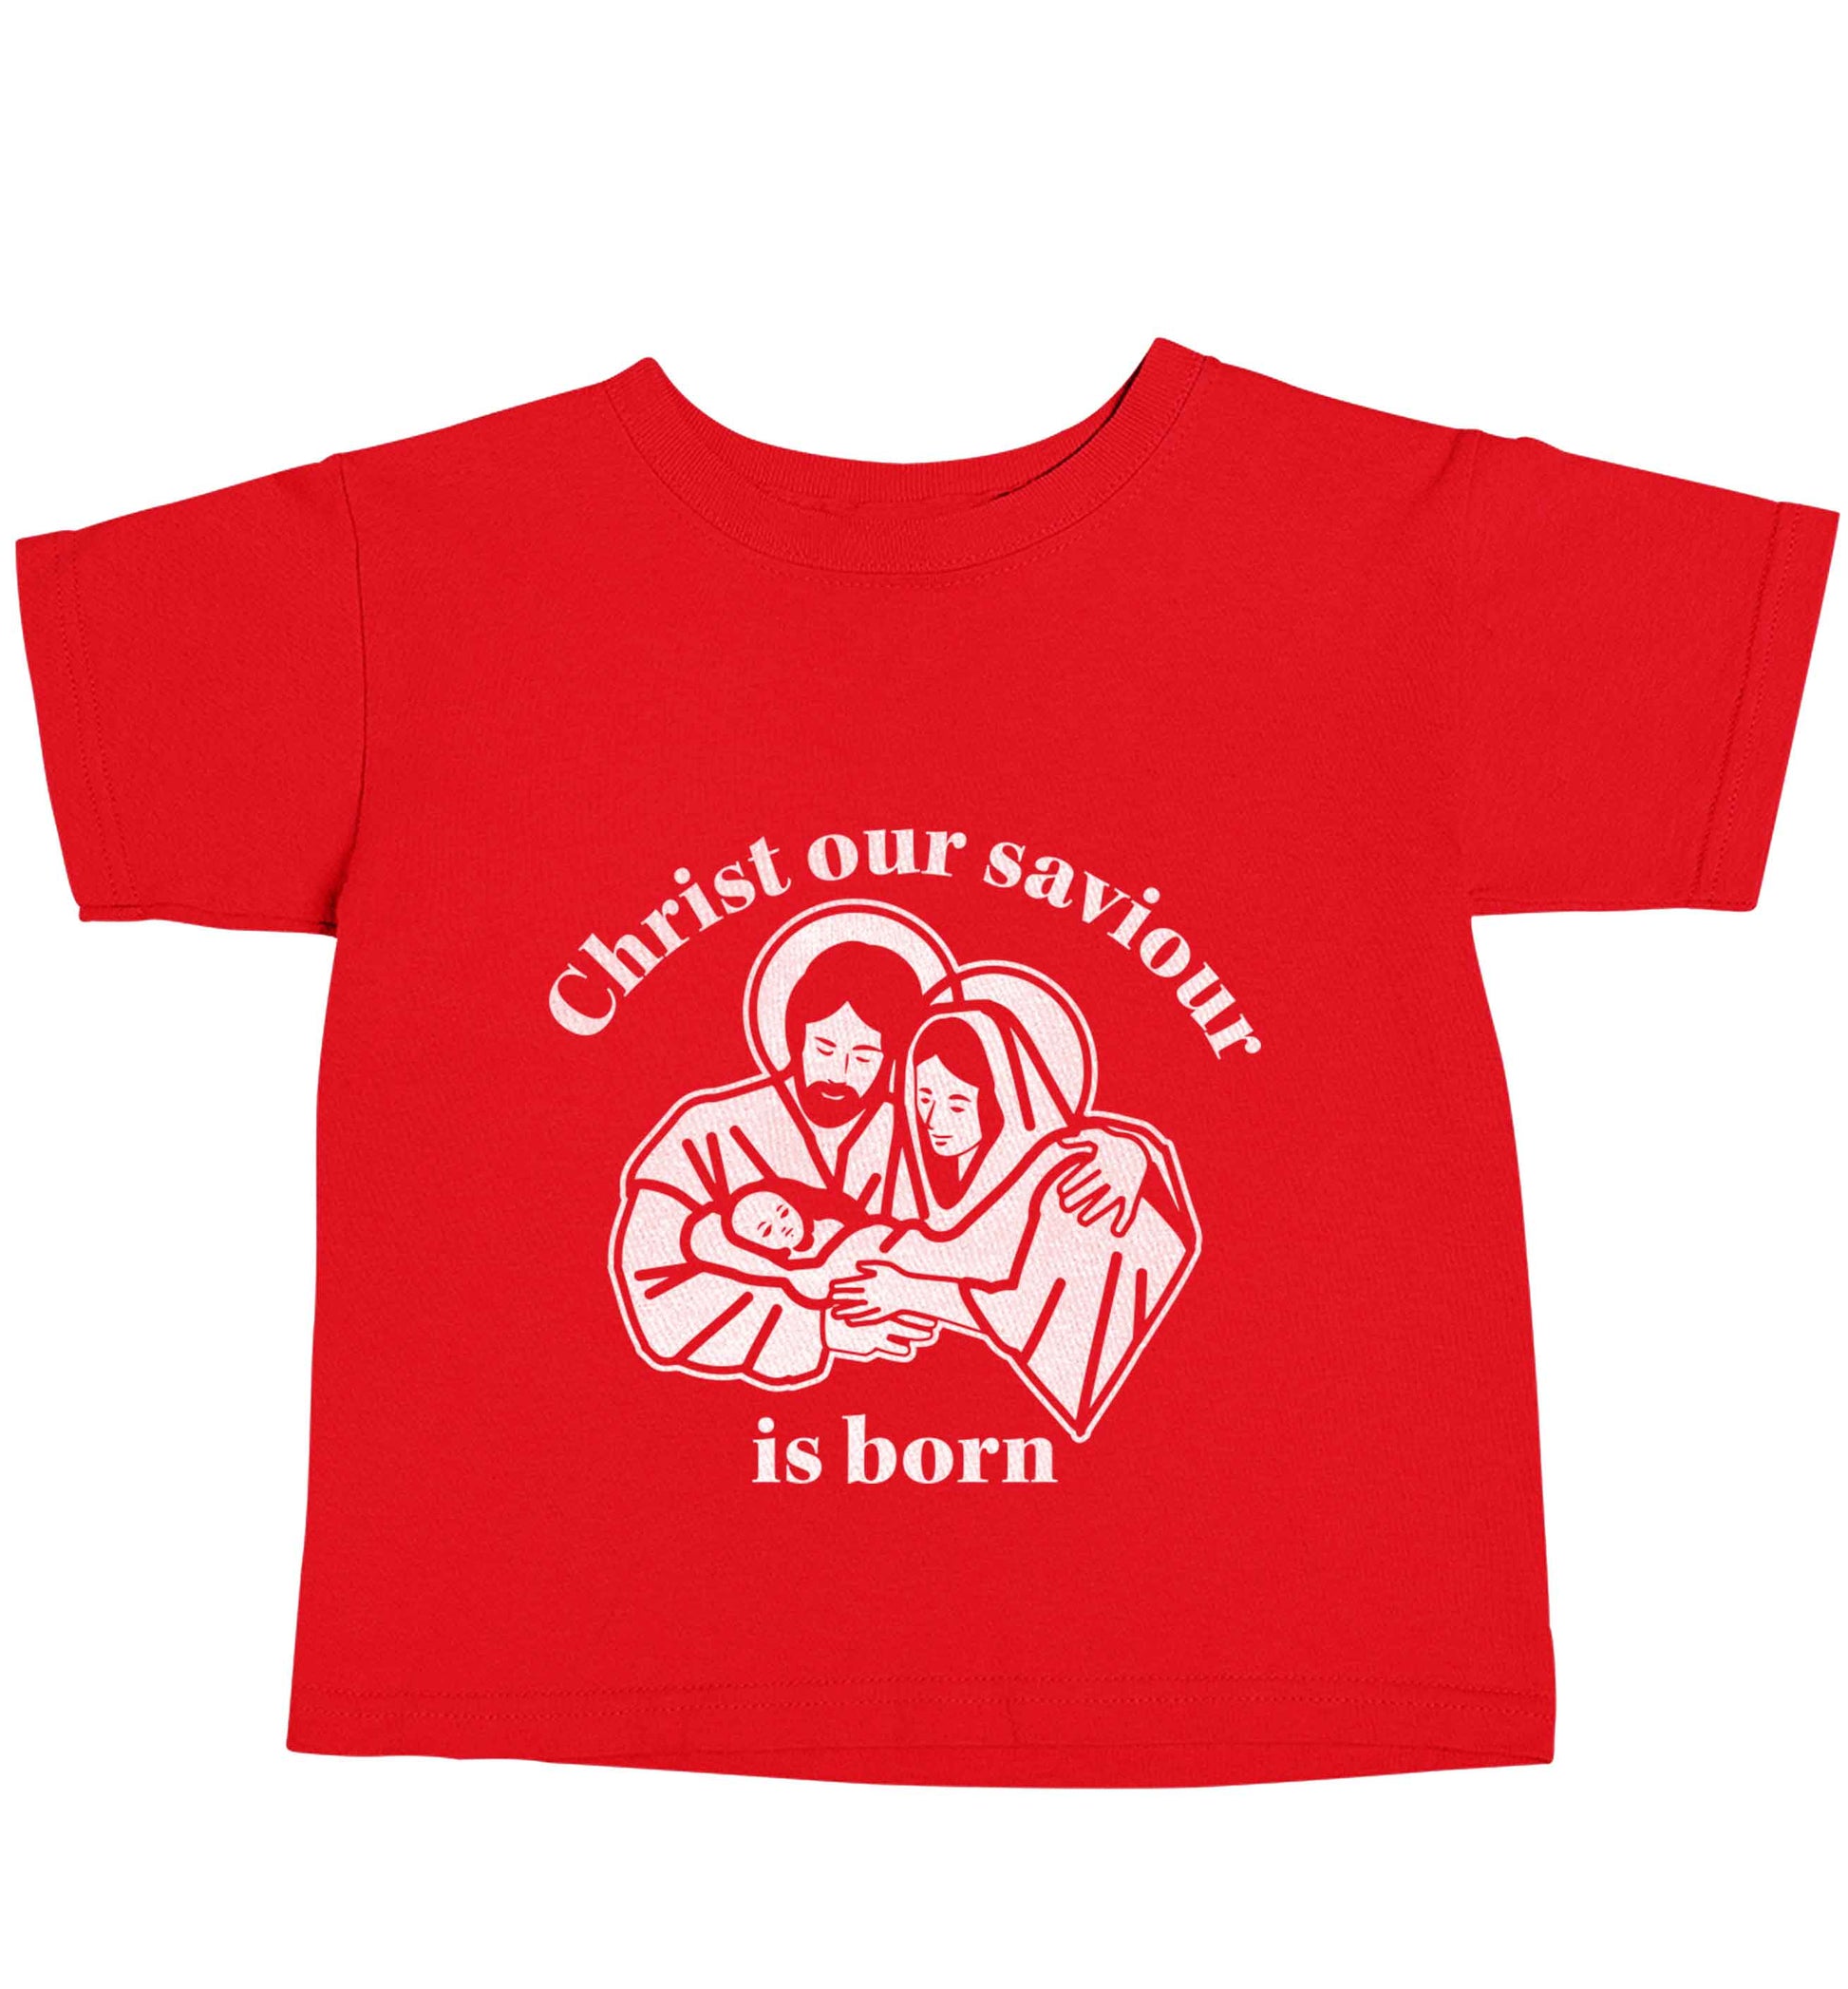 Christ our saviour is born red baby toddler Tshirt 2 Years